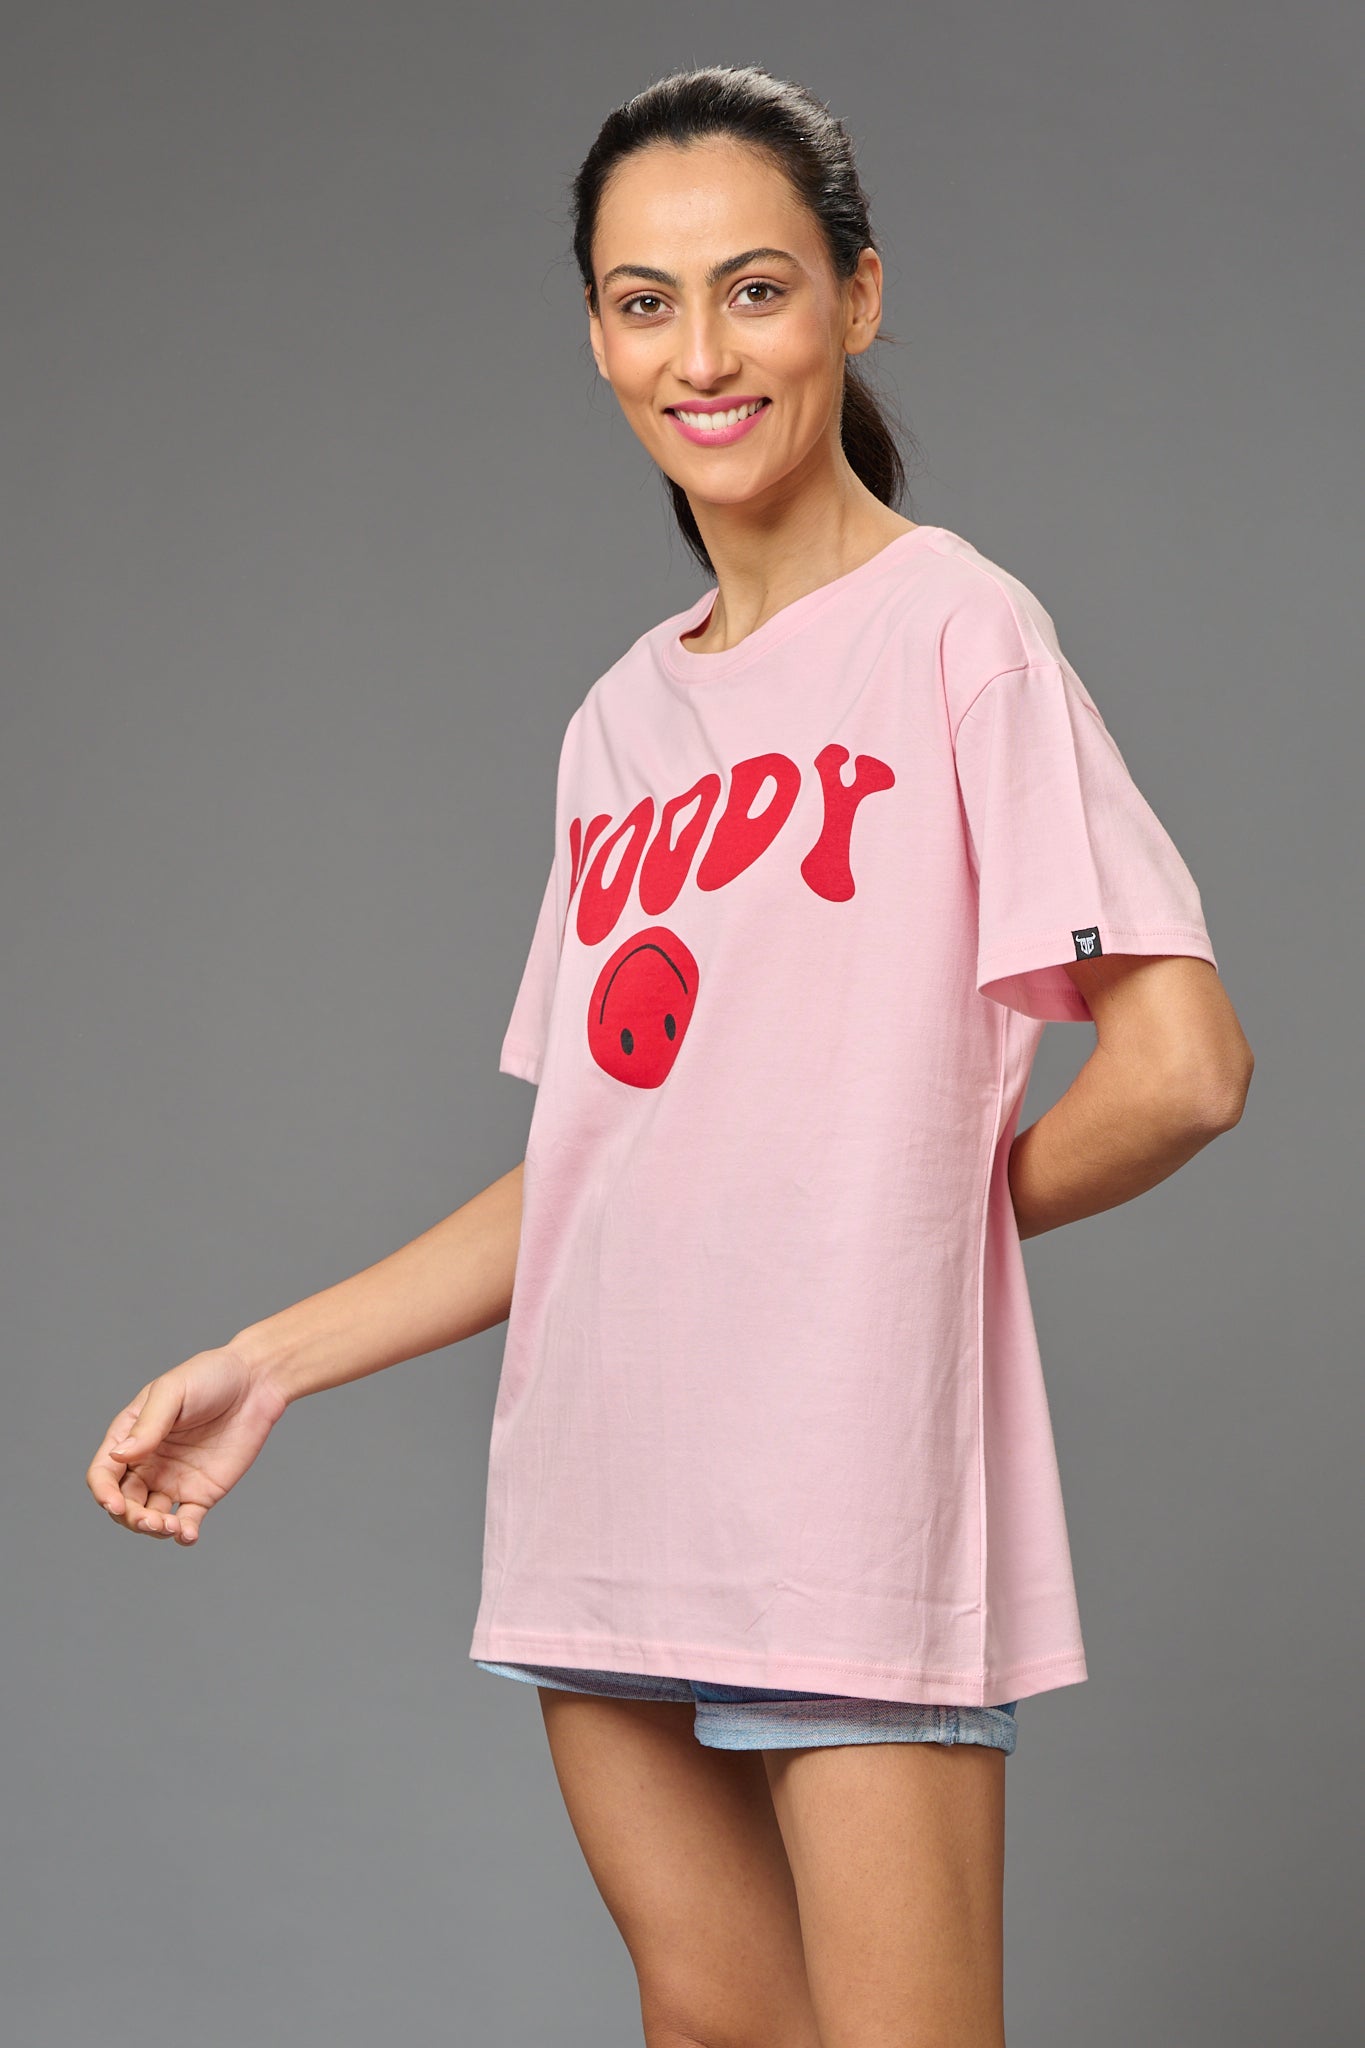 Moody Printed Baby Pink Oversized T-Shirt for Women - Go Devil